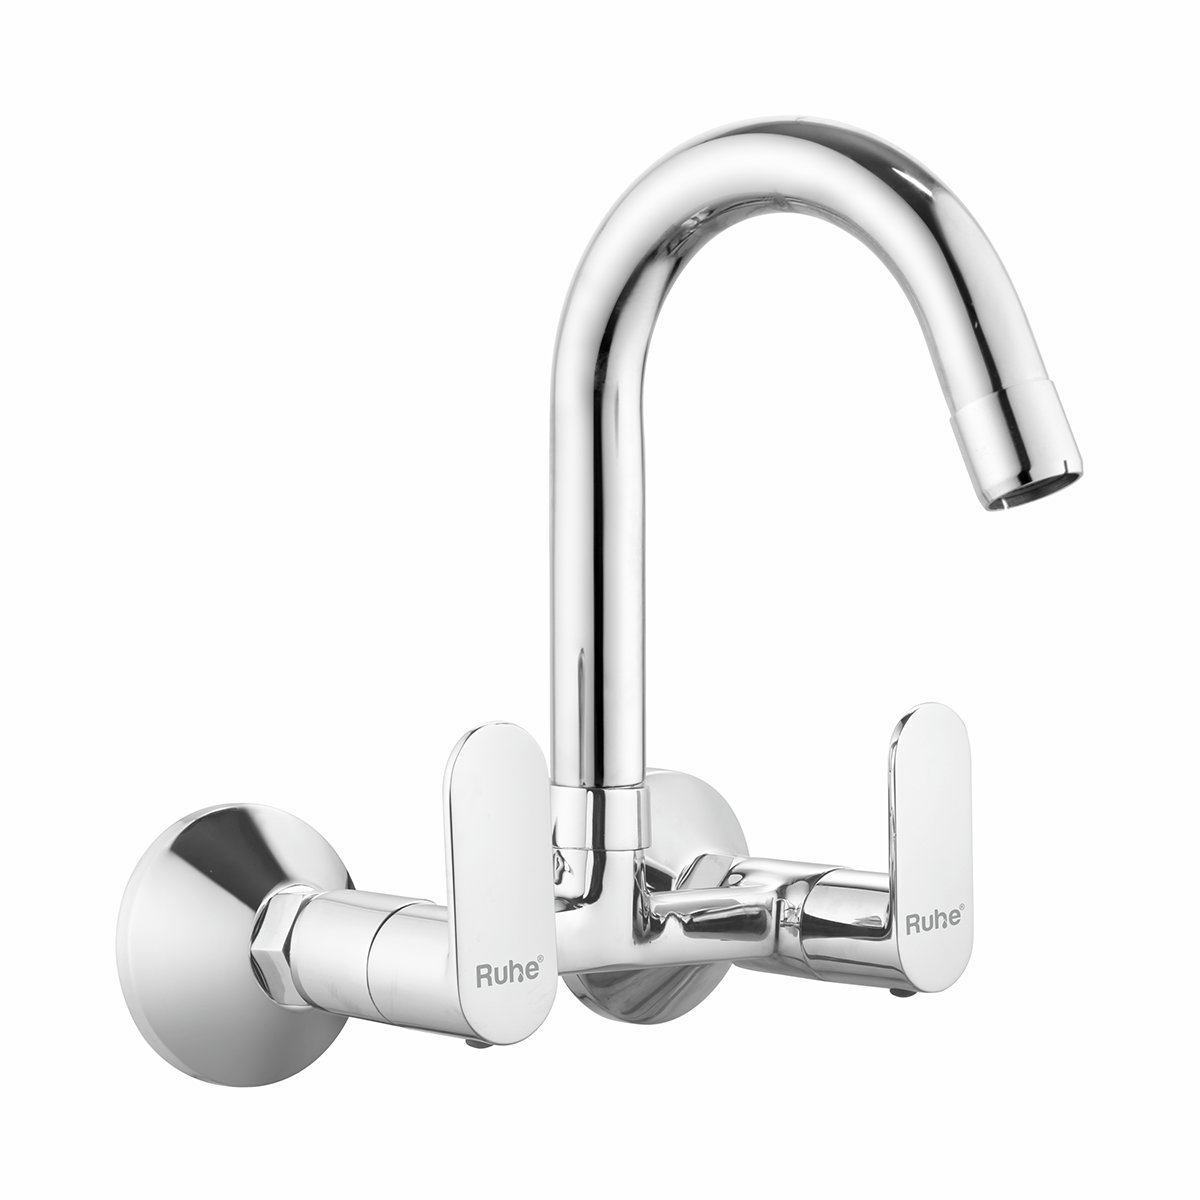 Demure Sink Mixer Brass Faucet with Small (12 inches) Round Swivel Spout - by Ruhe®